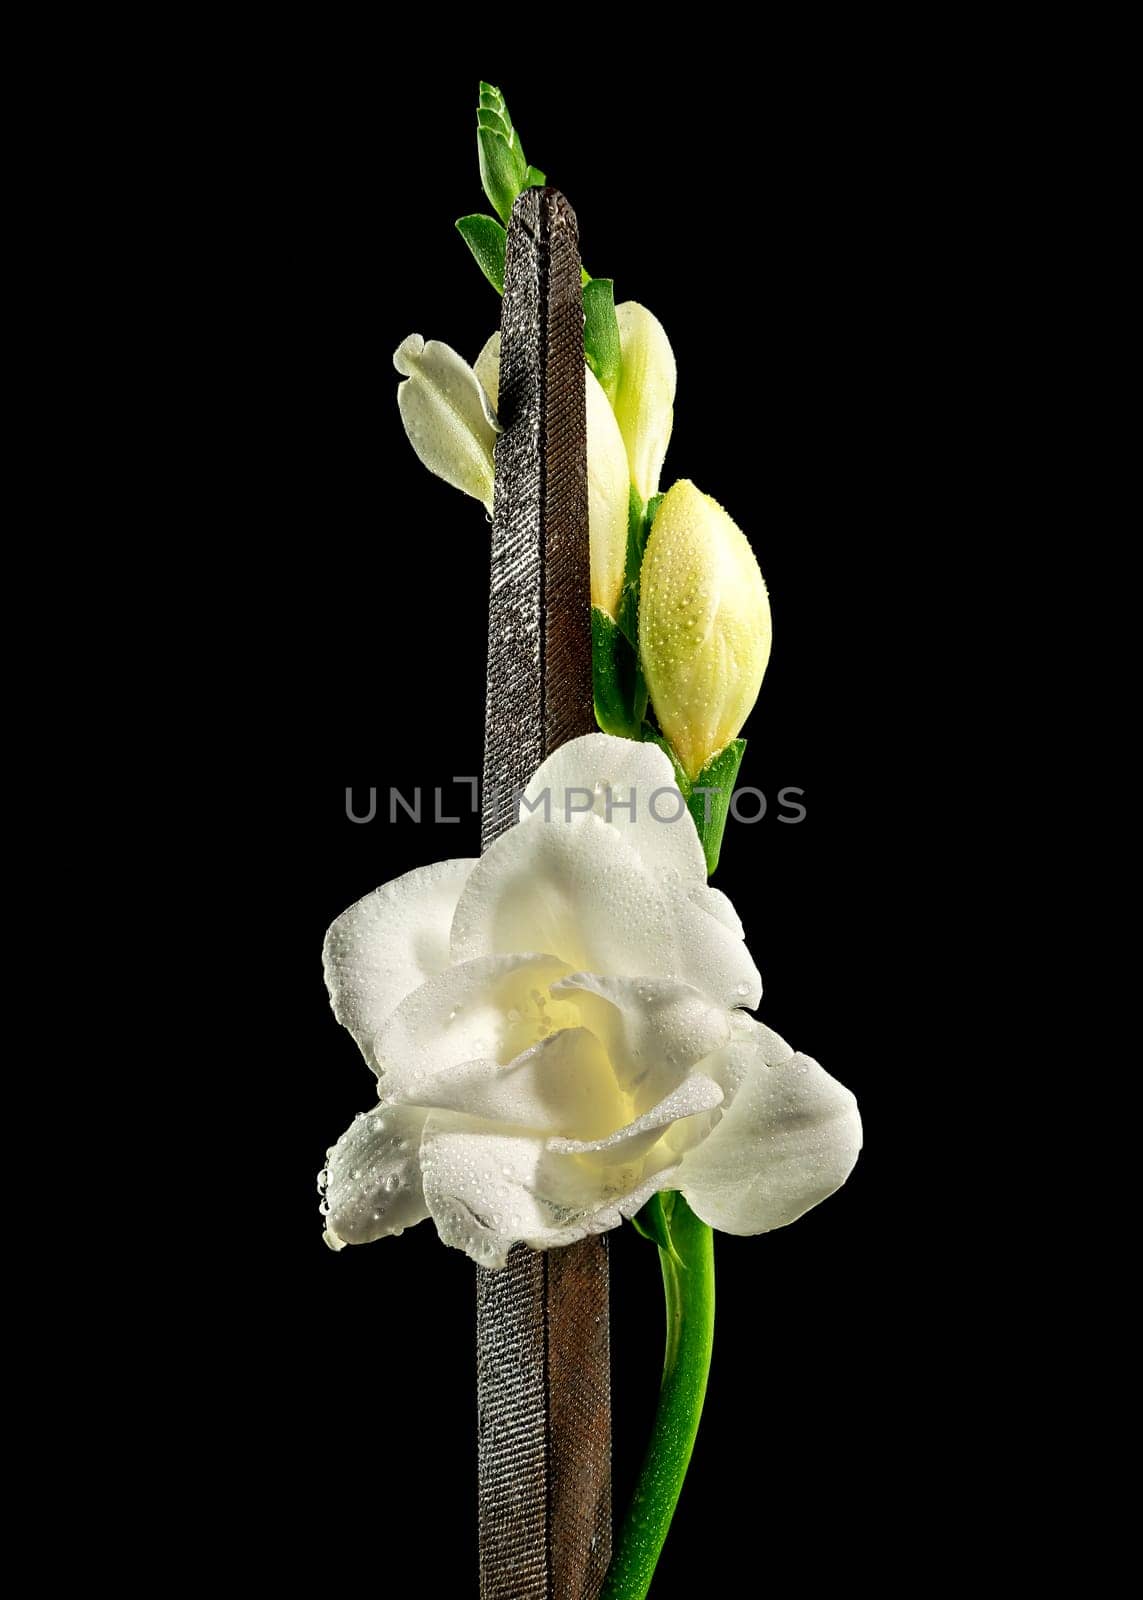 Old rusty metal tool and white freesia on a black background by Multipedia